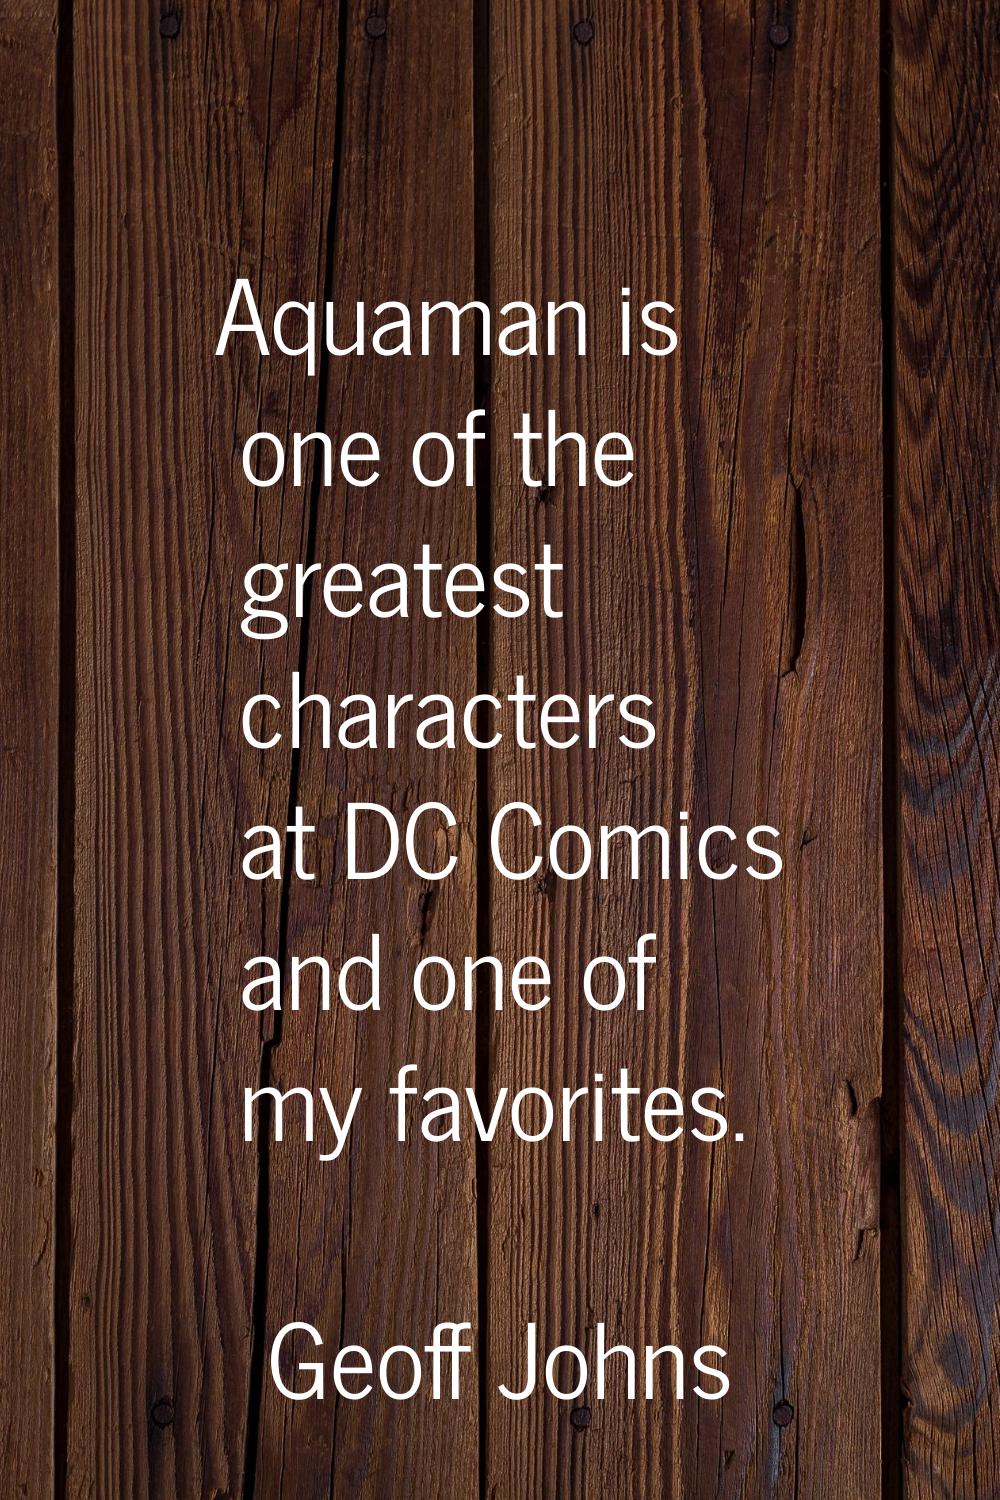 Aquaman is one of the greatest characters at DC Comics and one of my favorites.